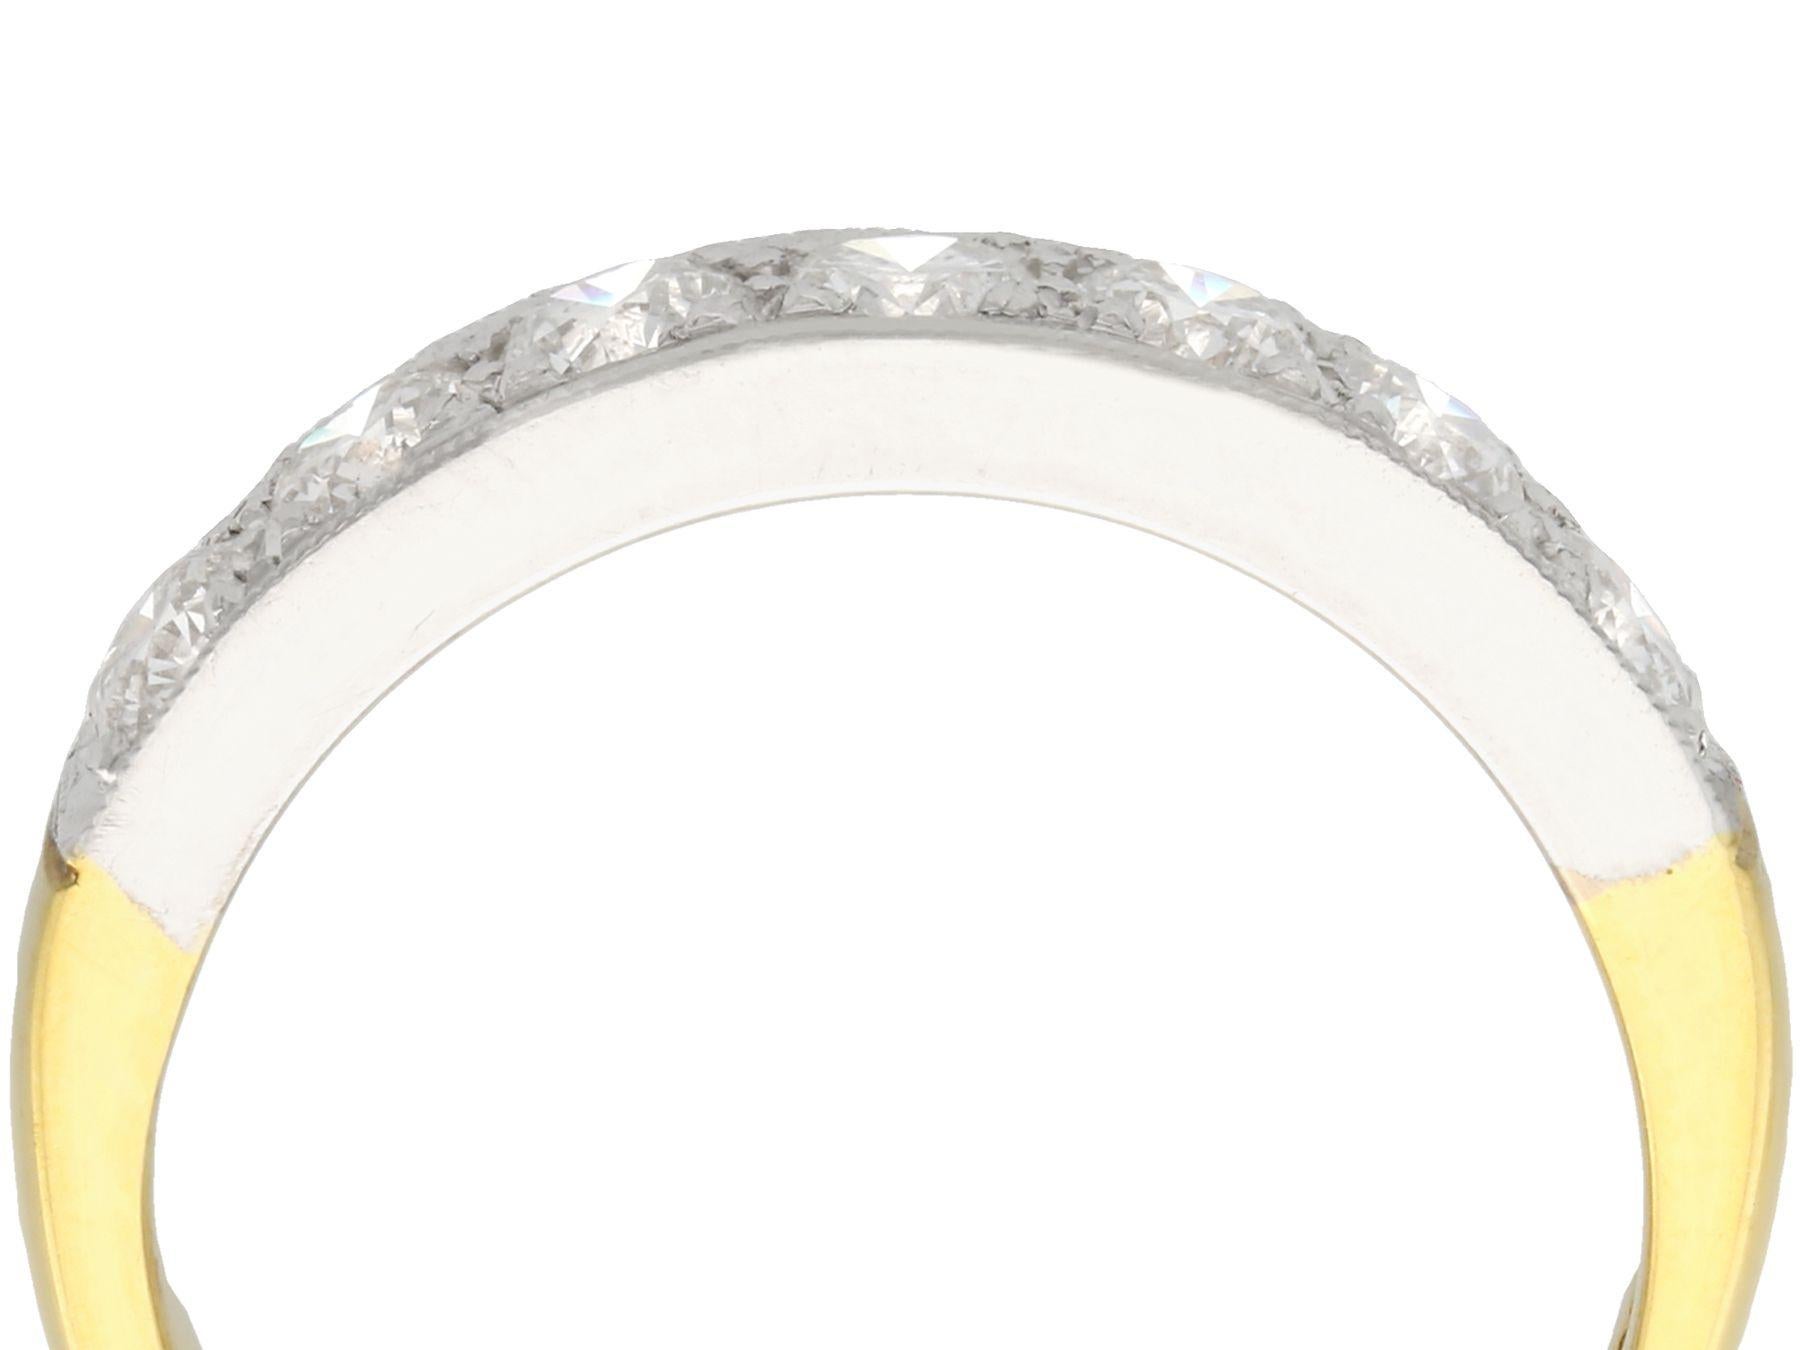 A fine and impressive 0.95 carat diamond, 18 karat yellow gold, platinum set, half eternity ring; part of our contemporary jewelry and jewelry collection

This fine contemporary half eternity diamond ring has been crafted in 18k yellow gold with a